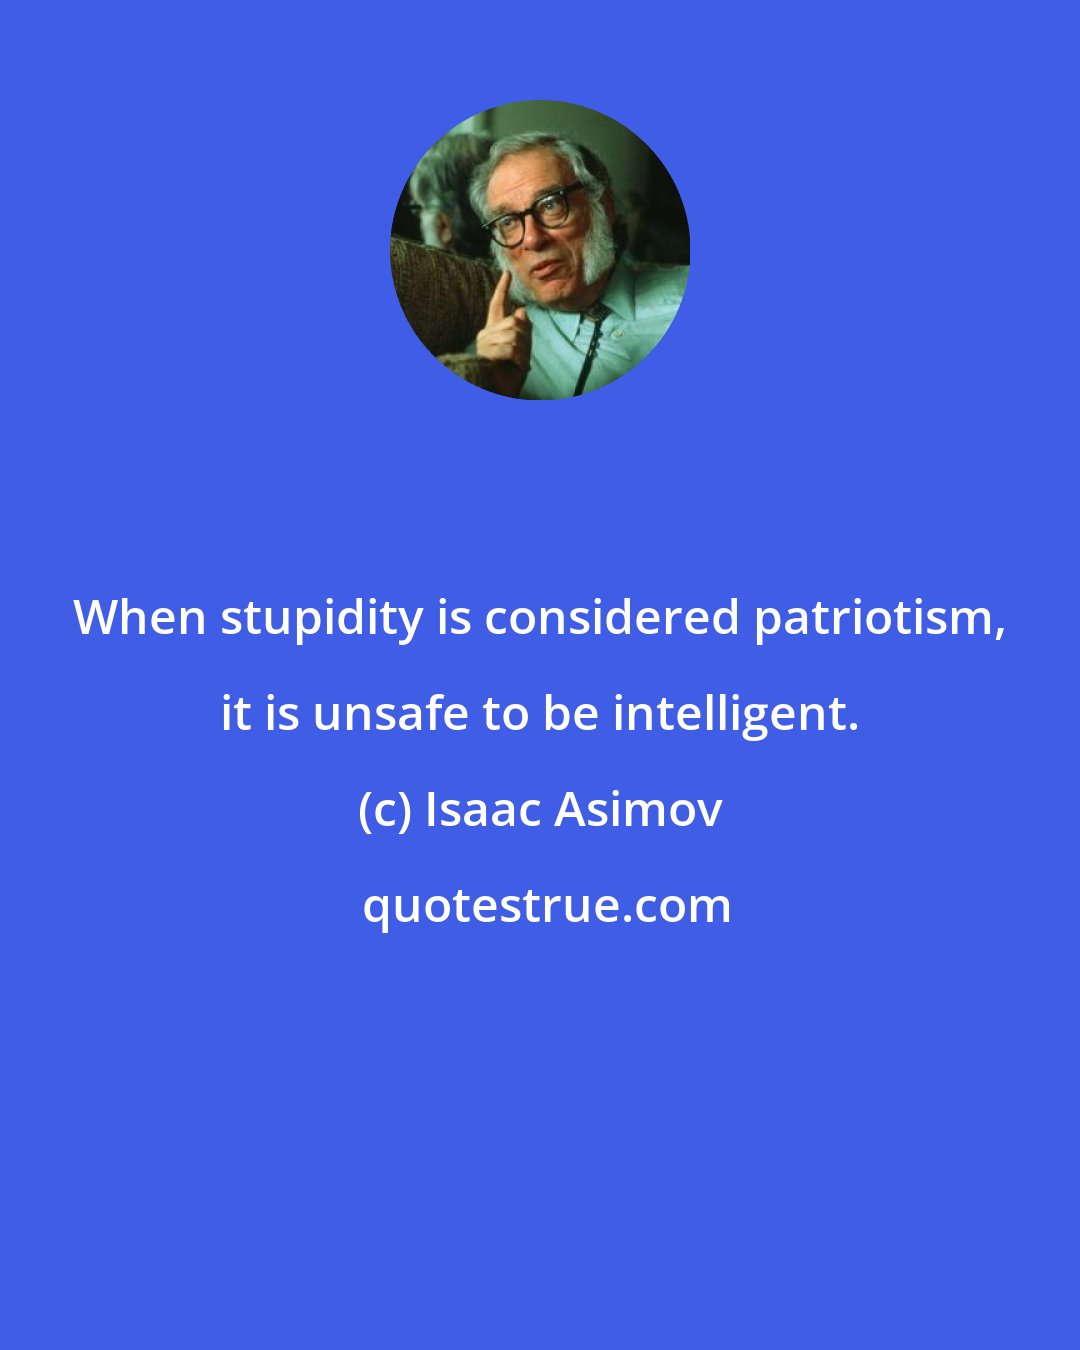 Isaac Asimov: When stupidity is considered patriotism, it is unsafe to be intelligent.